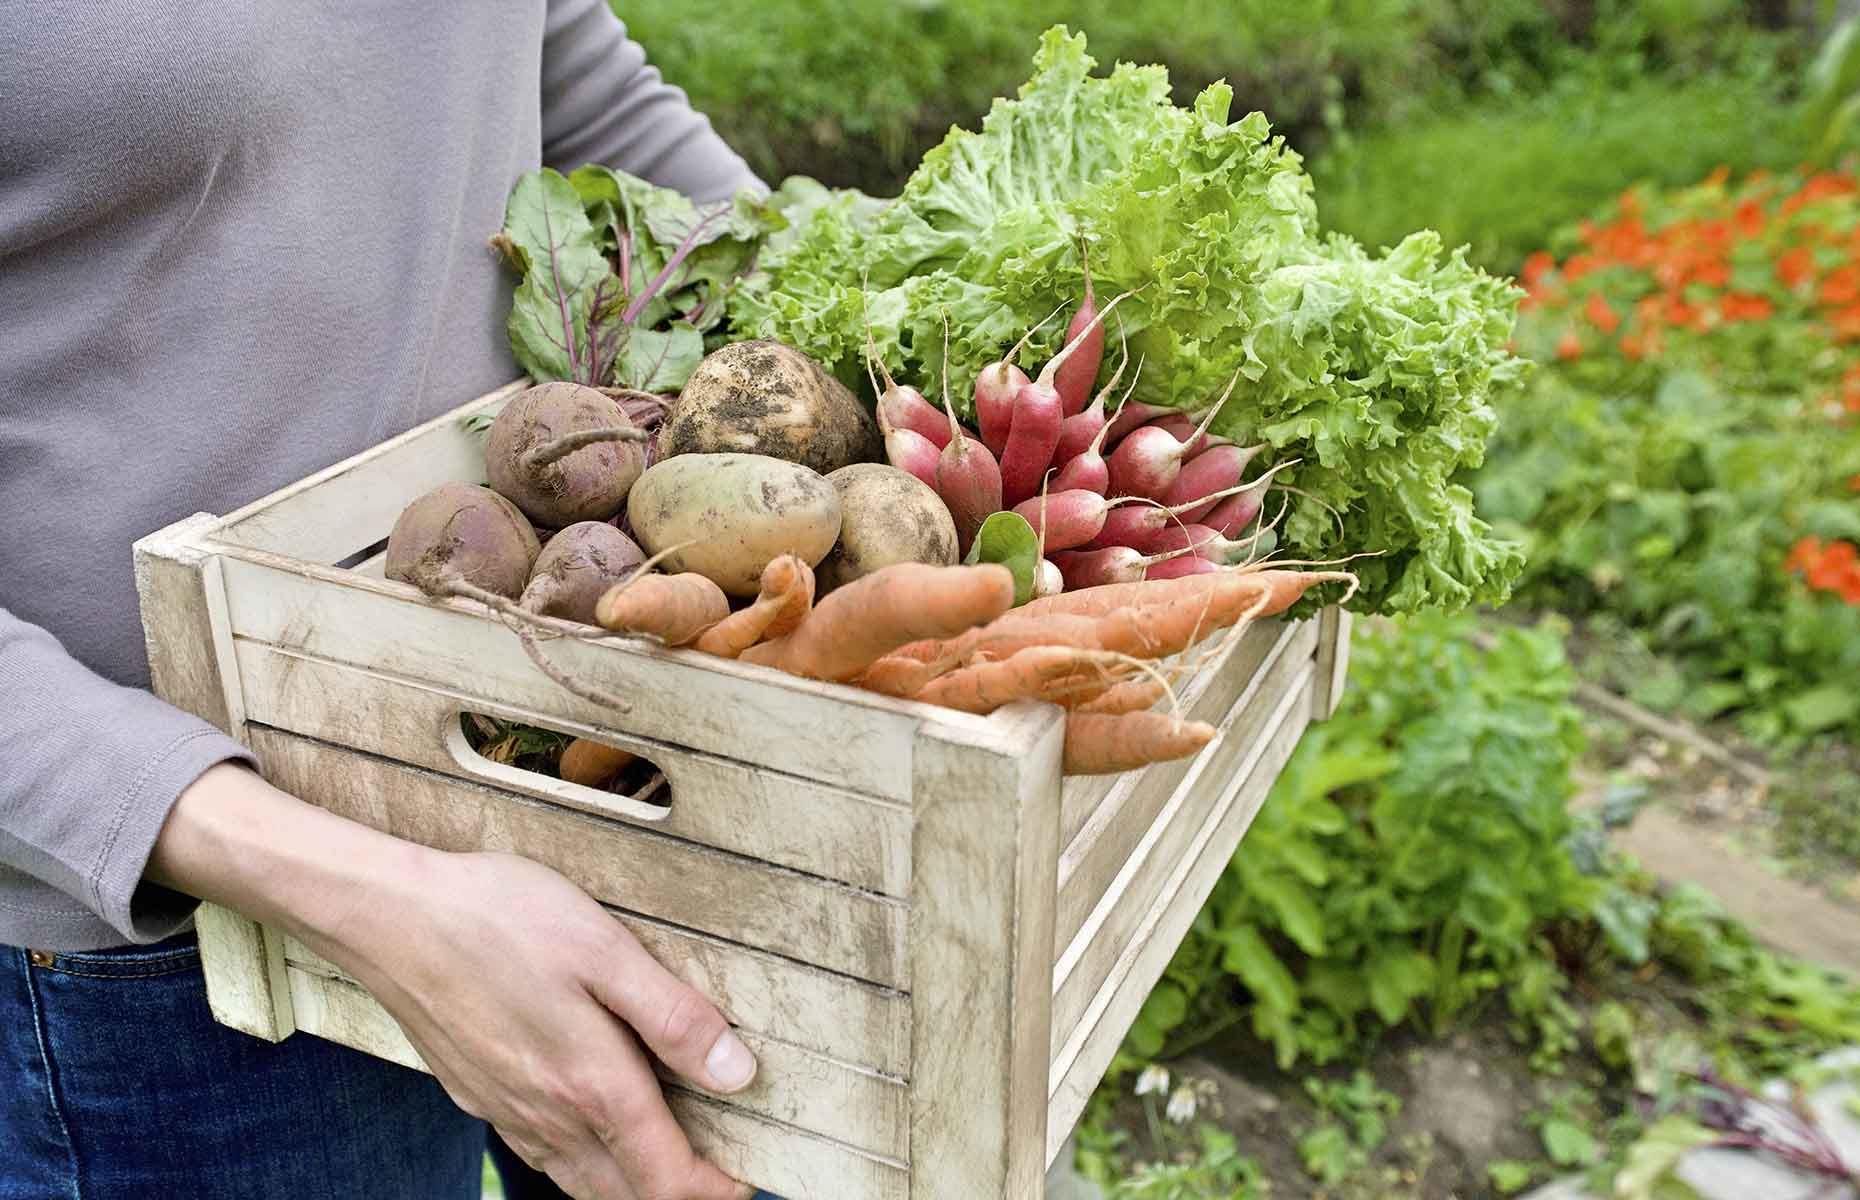 <p>Growing your own crops does take a little time and effort and initial investment, but the rewards are many. There’s nothing quite like having a regular supply of fresh and tasty fruit and vegetables direct from your yard to your table, plus <a href="https://www.loveproperty.com/news/84550/grow-how-expert-tips-for-amateur-gardeners">gardening is good for the body and soul</a>. Getting regular exercise can relieve stress and anxiety and boost energy, while a daily dose of sunshine produces Vitamin D, essential for healthy bones and teeth.</p>